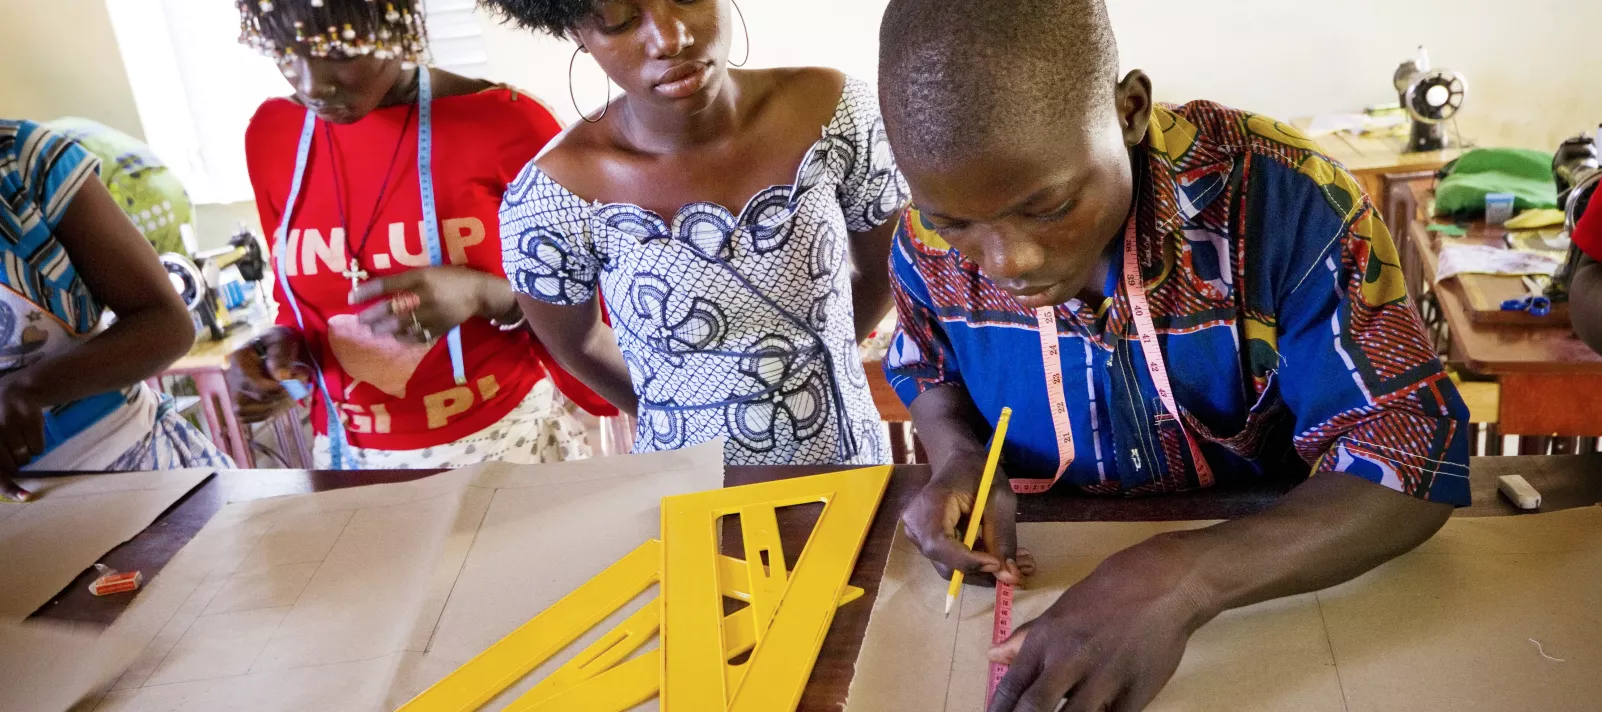 A student measures shapes at a class in Burkina Faso.